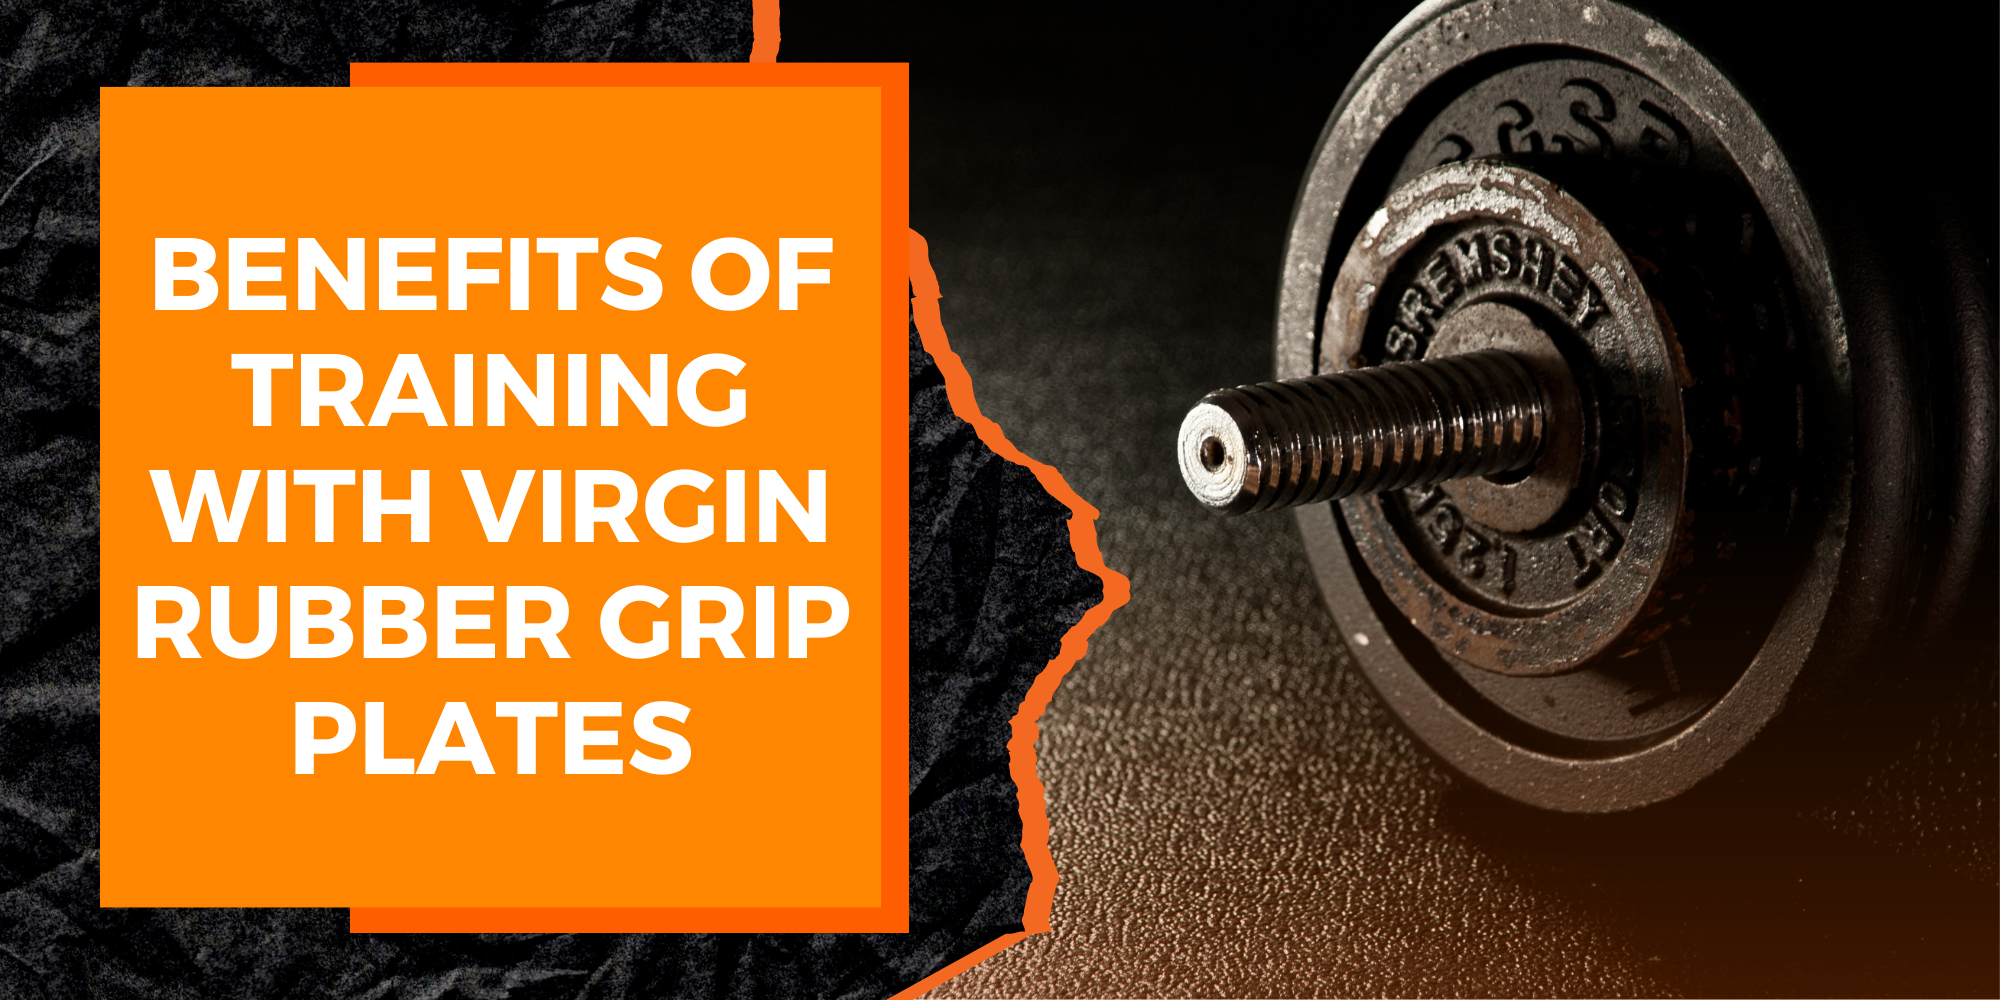 Benefits of Training with Virgin Rubber Grip Plates